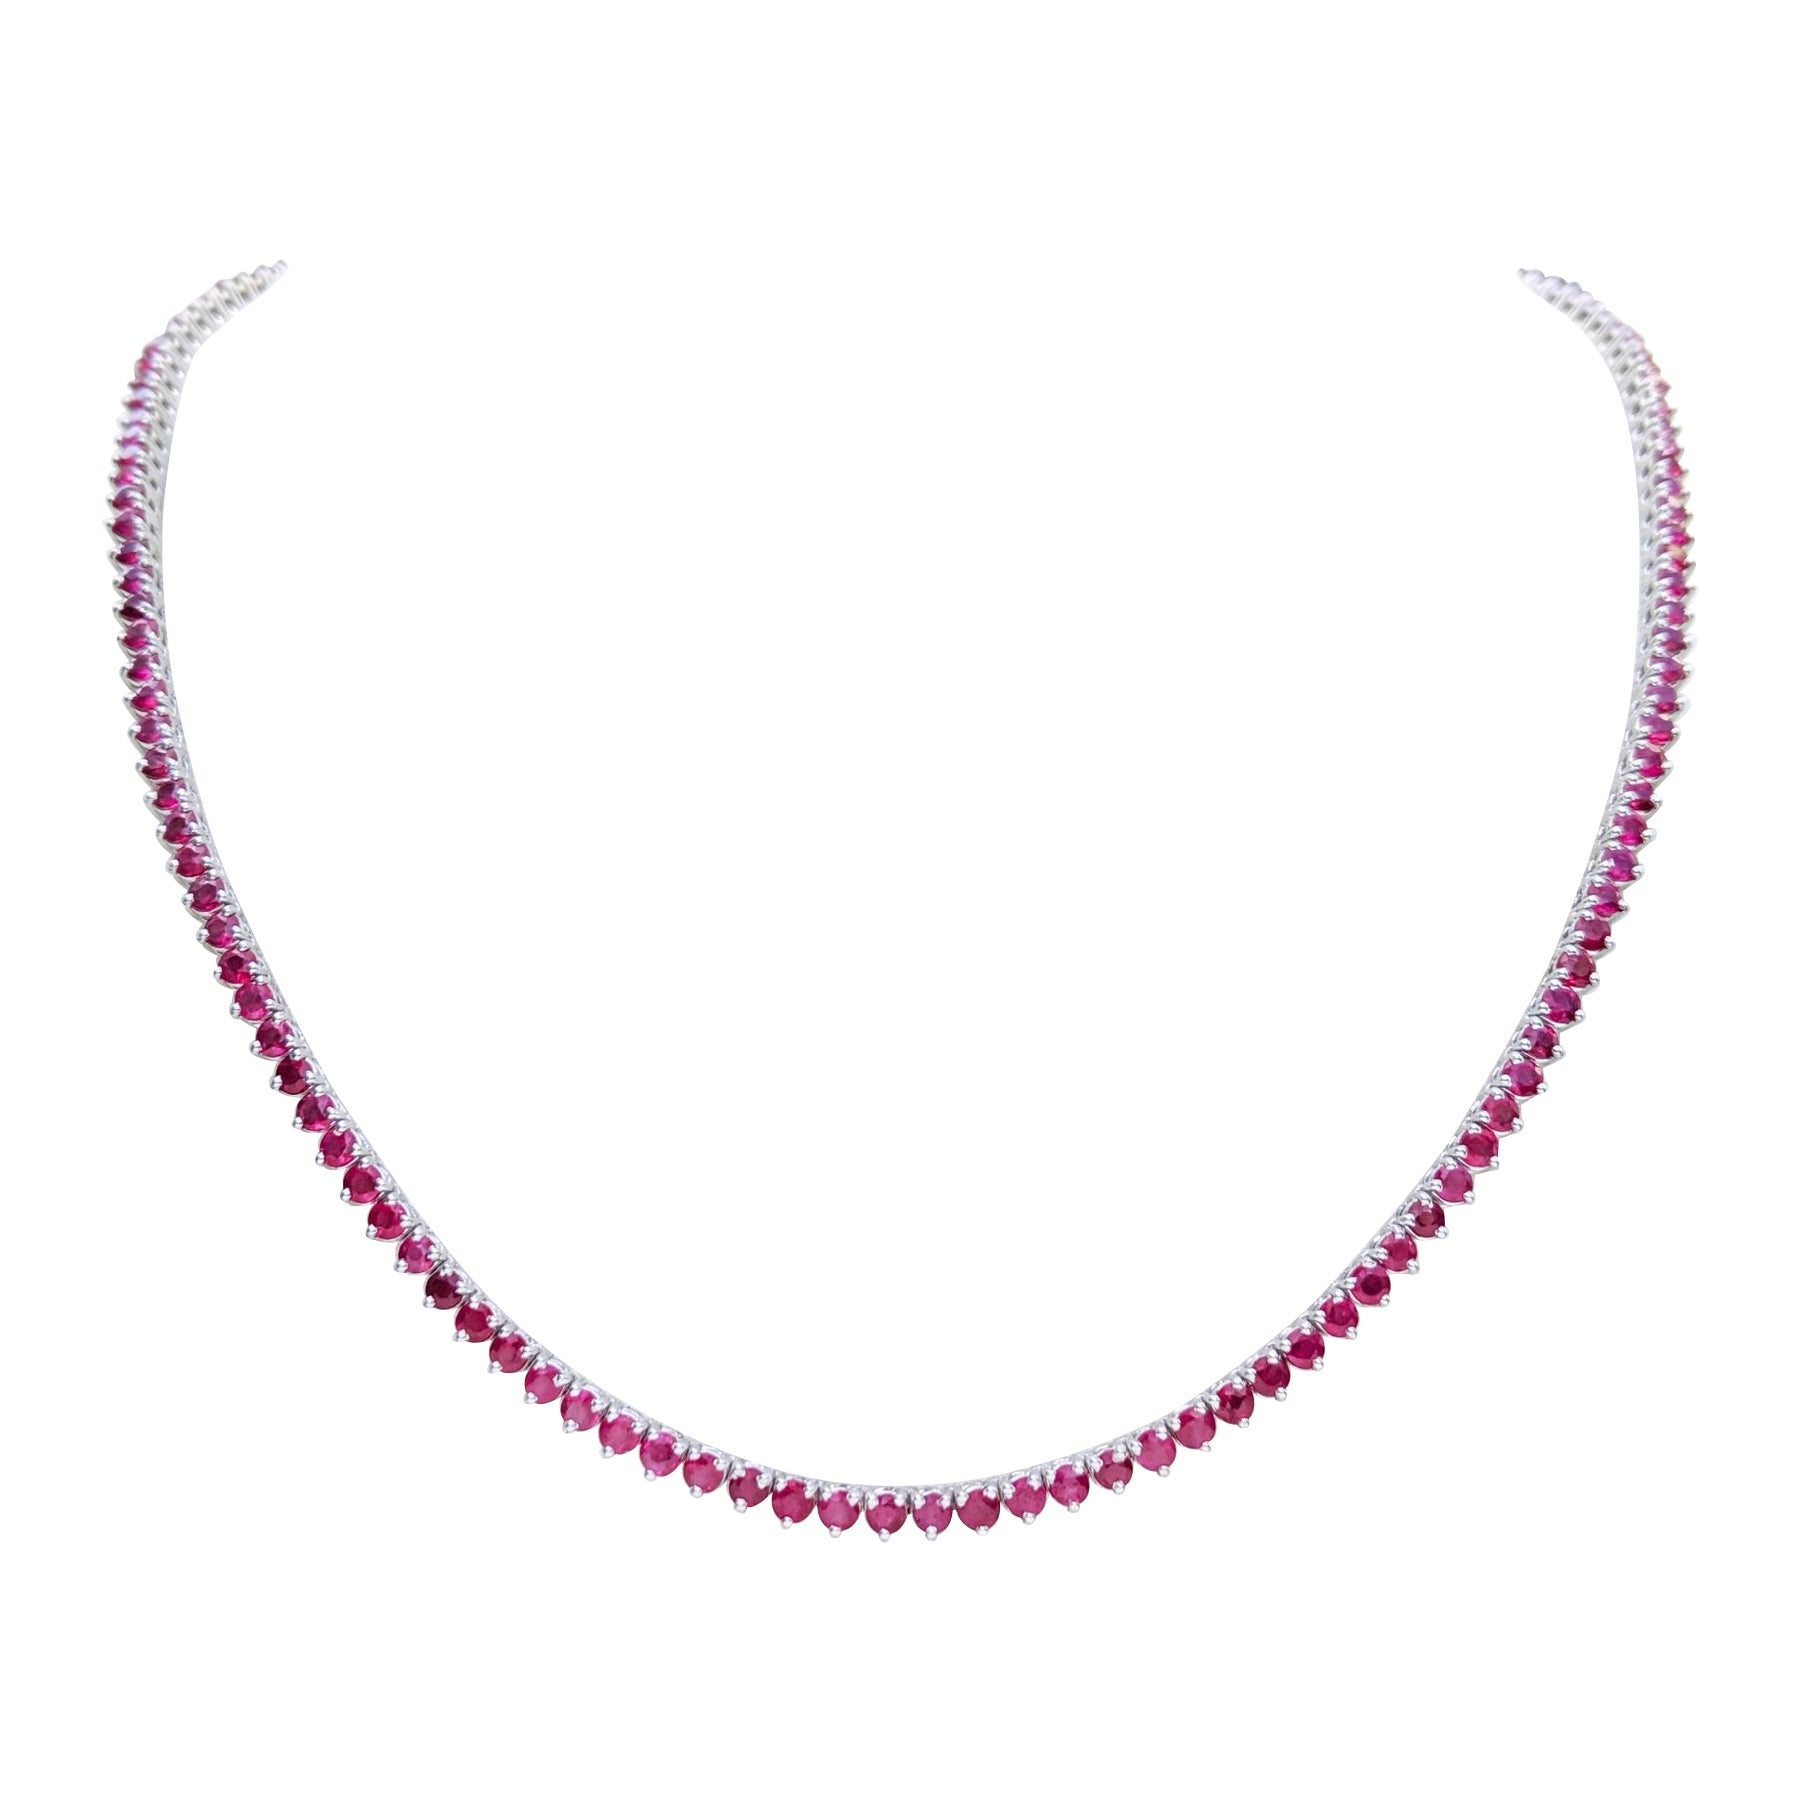 NO RESERVE! Necklace - 14 kt. White gold -  13.92 tw. Ruby 